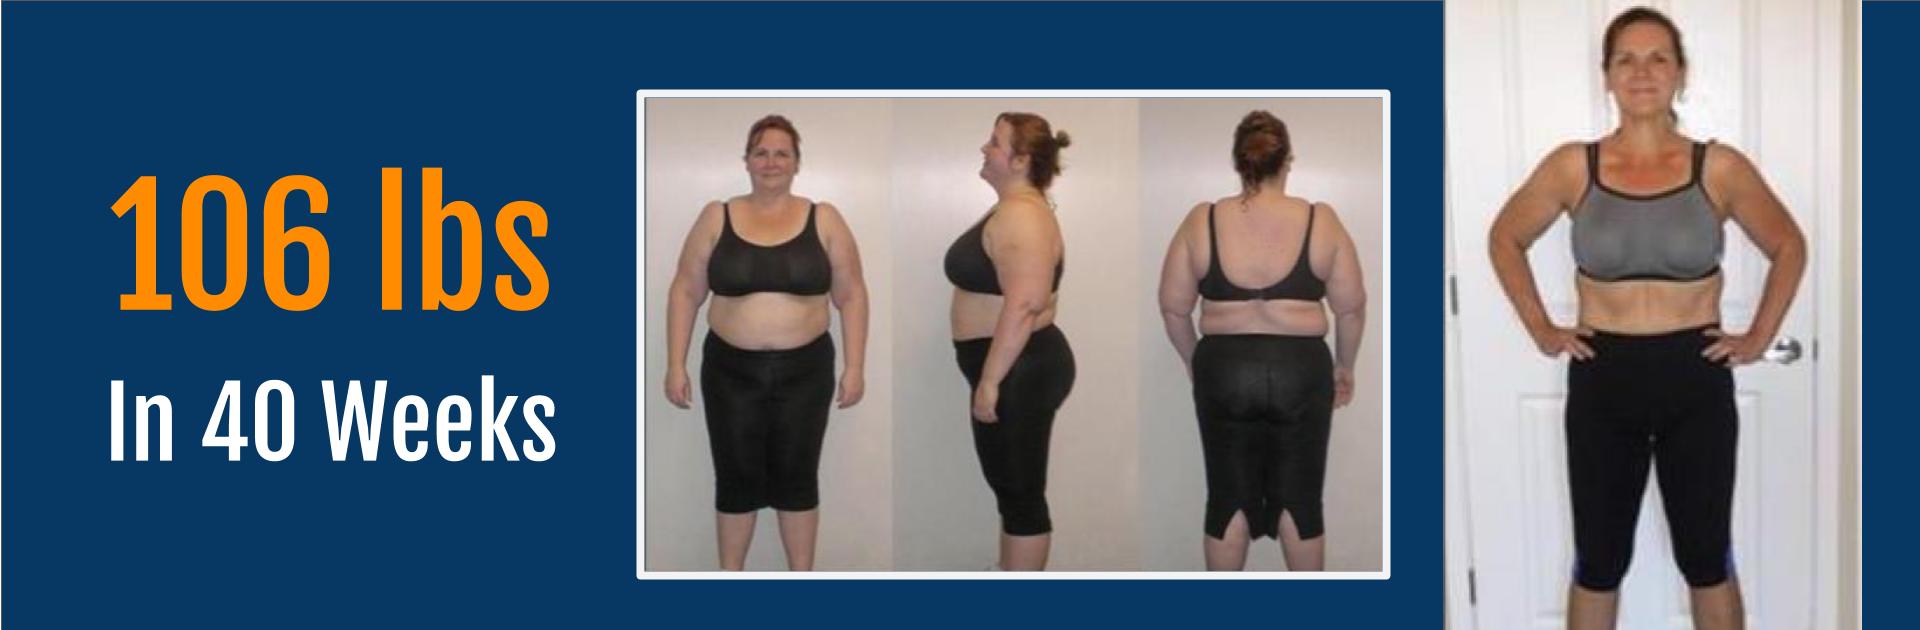 before and after weight loss of 106 pounds in 40 weeks